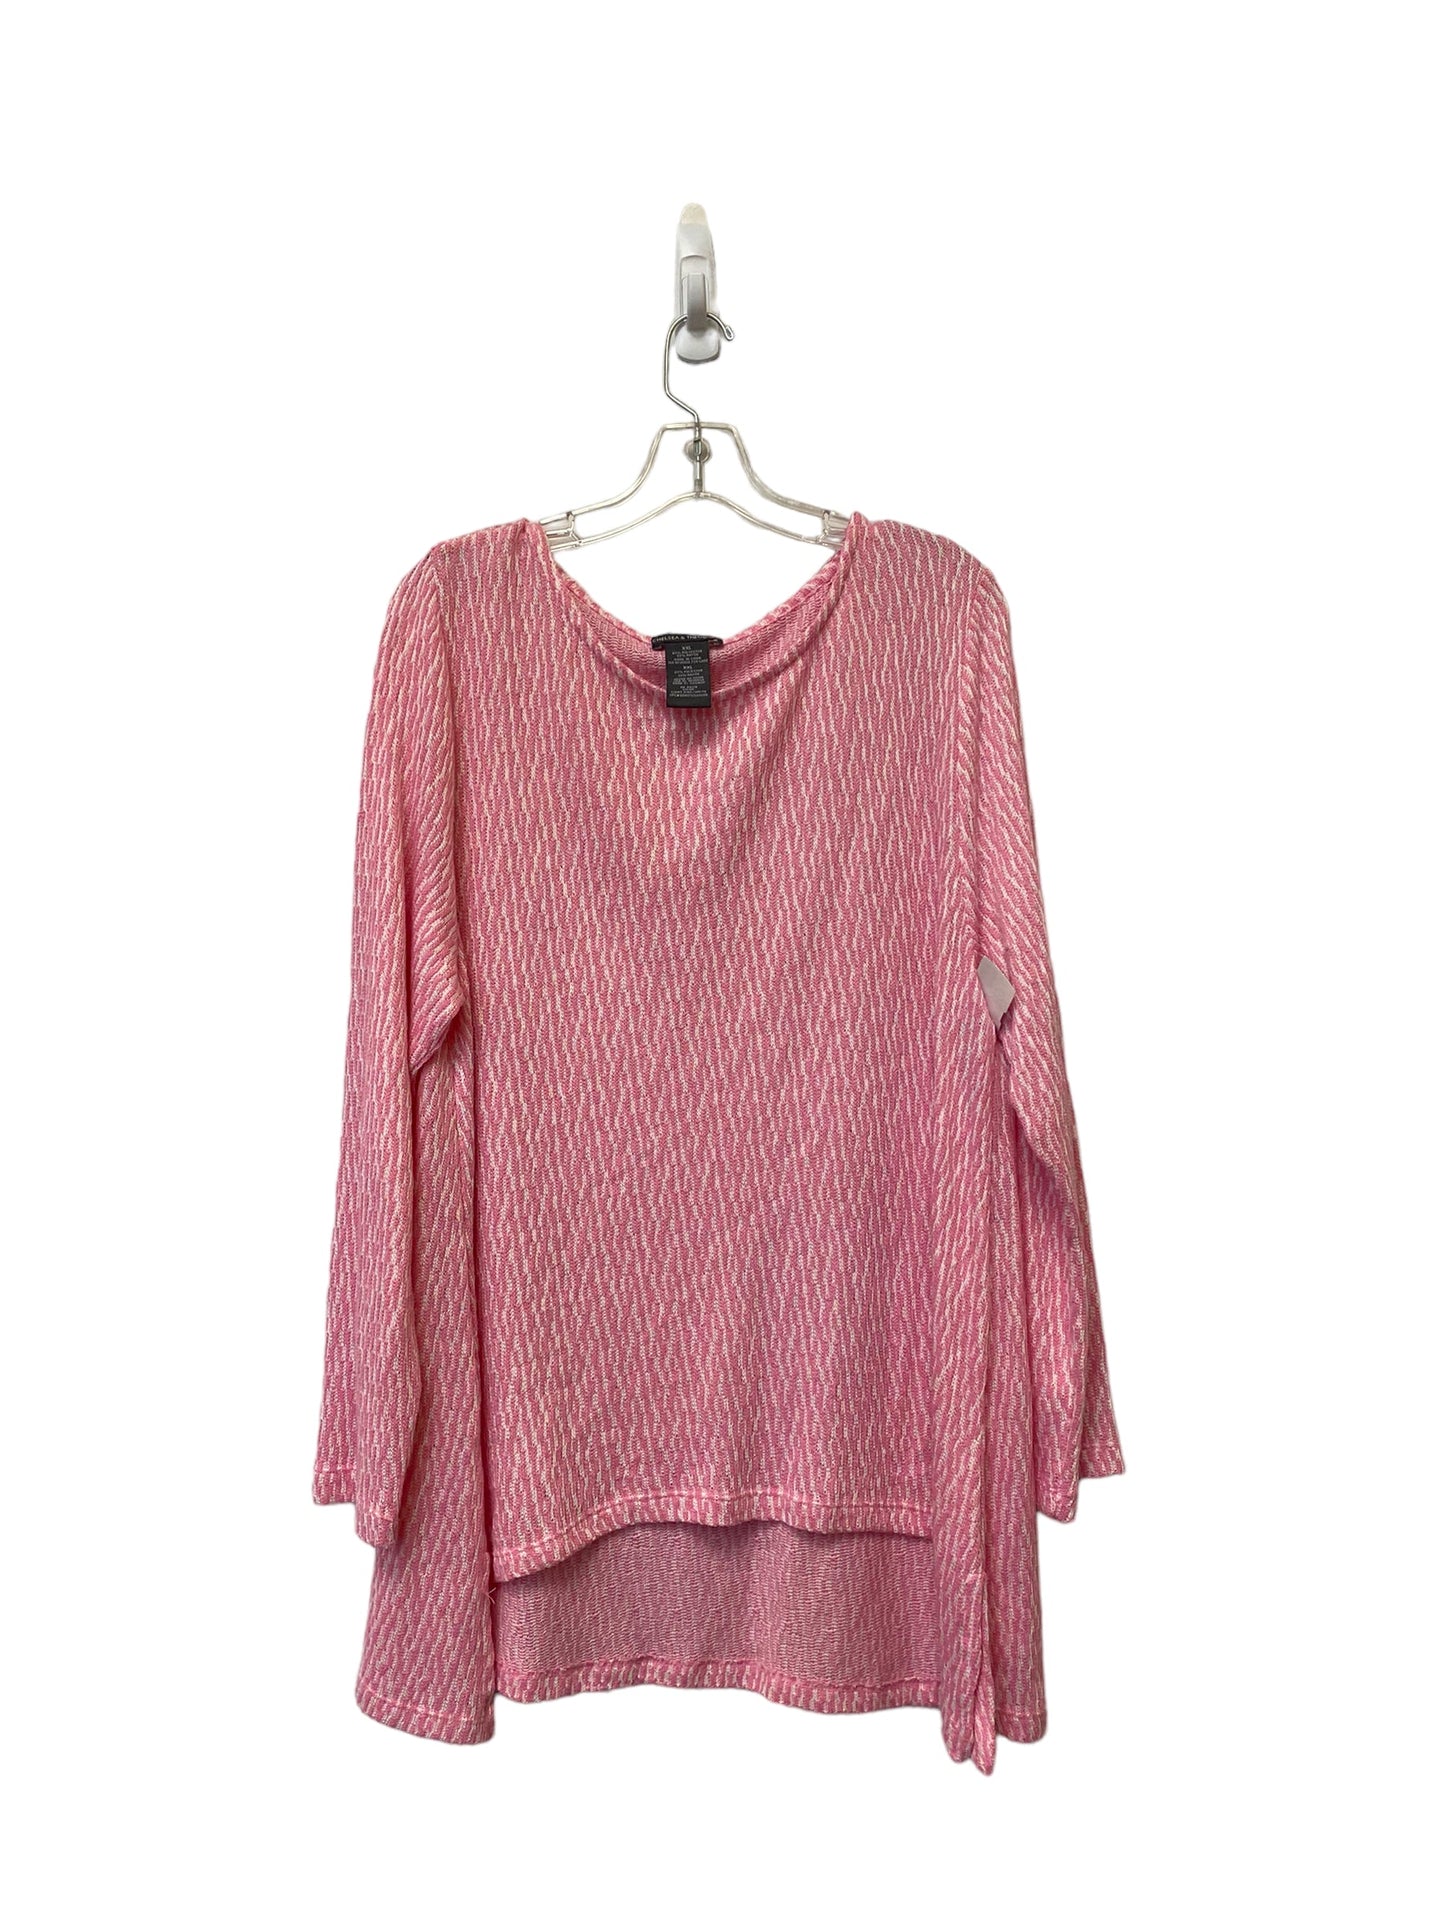 Top Long Sleeve By Chelsea And Theodore  Size: Xxl